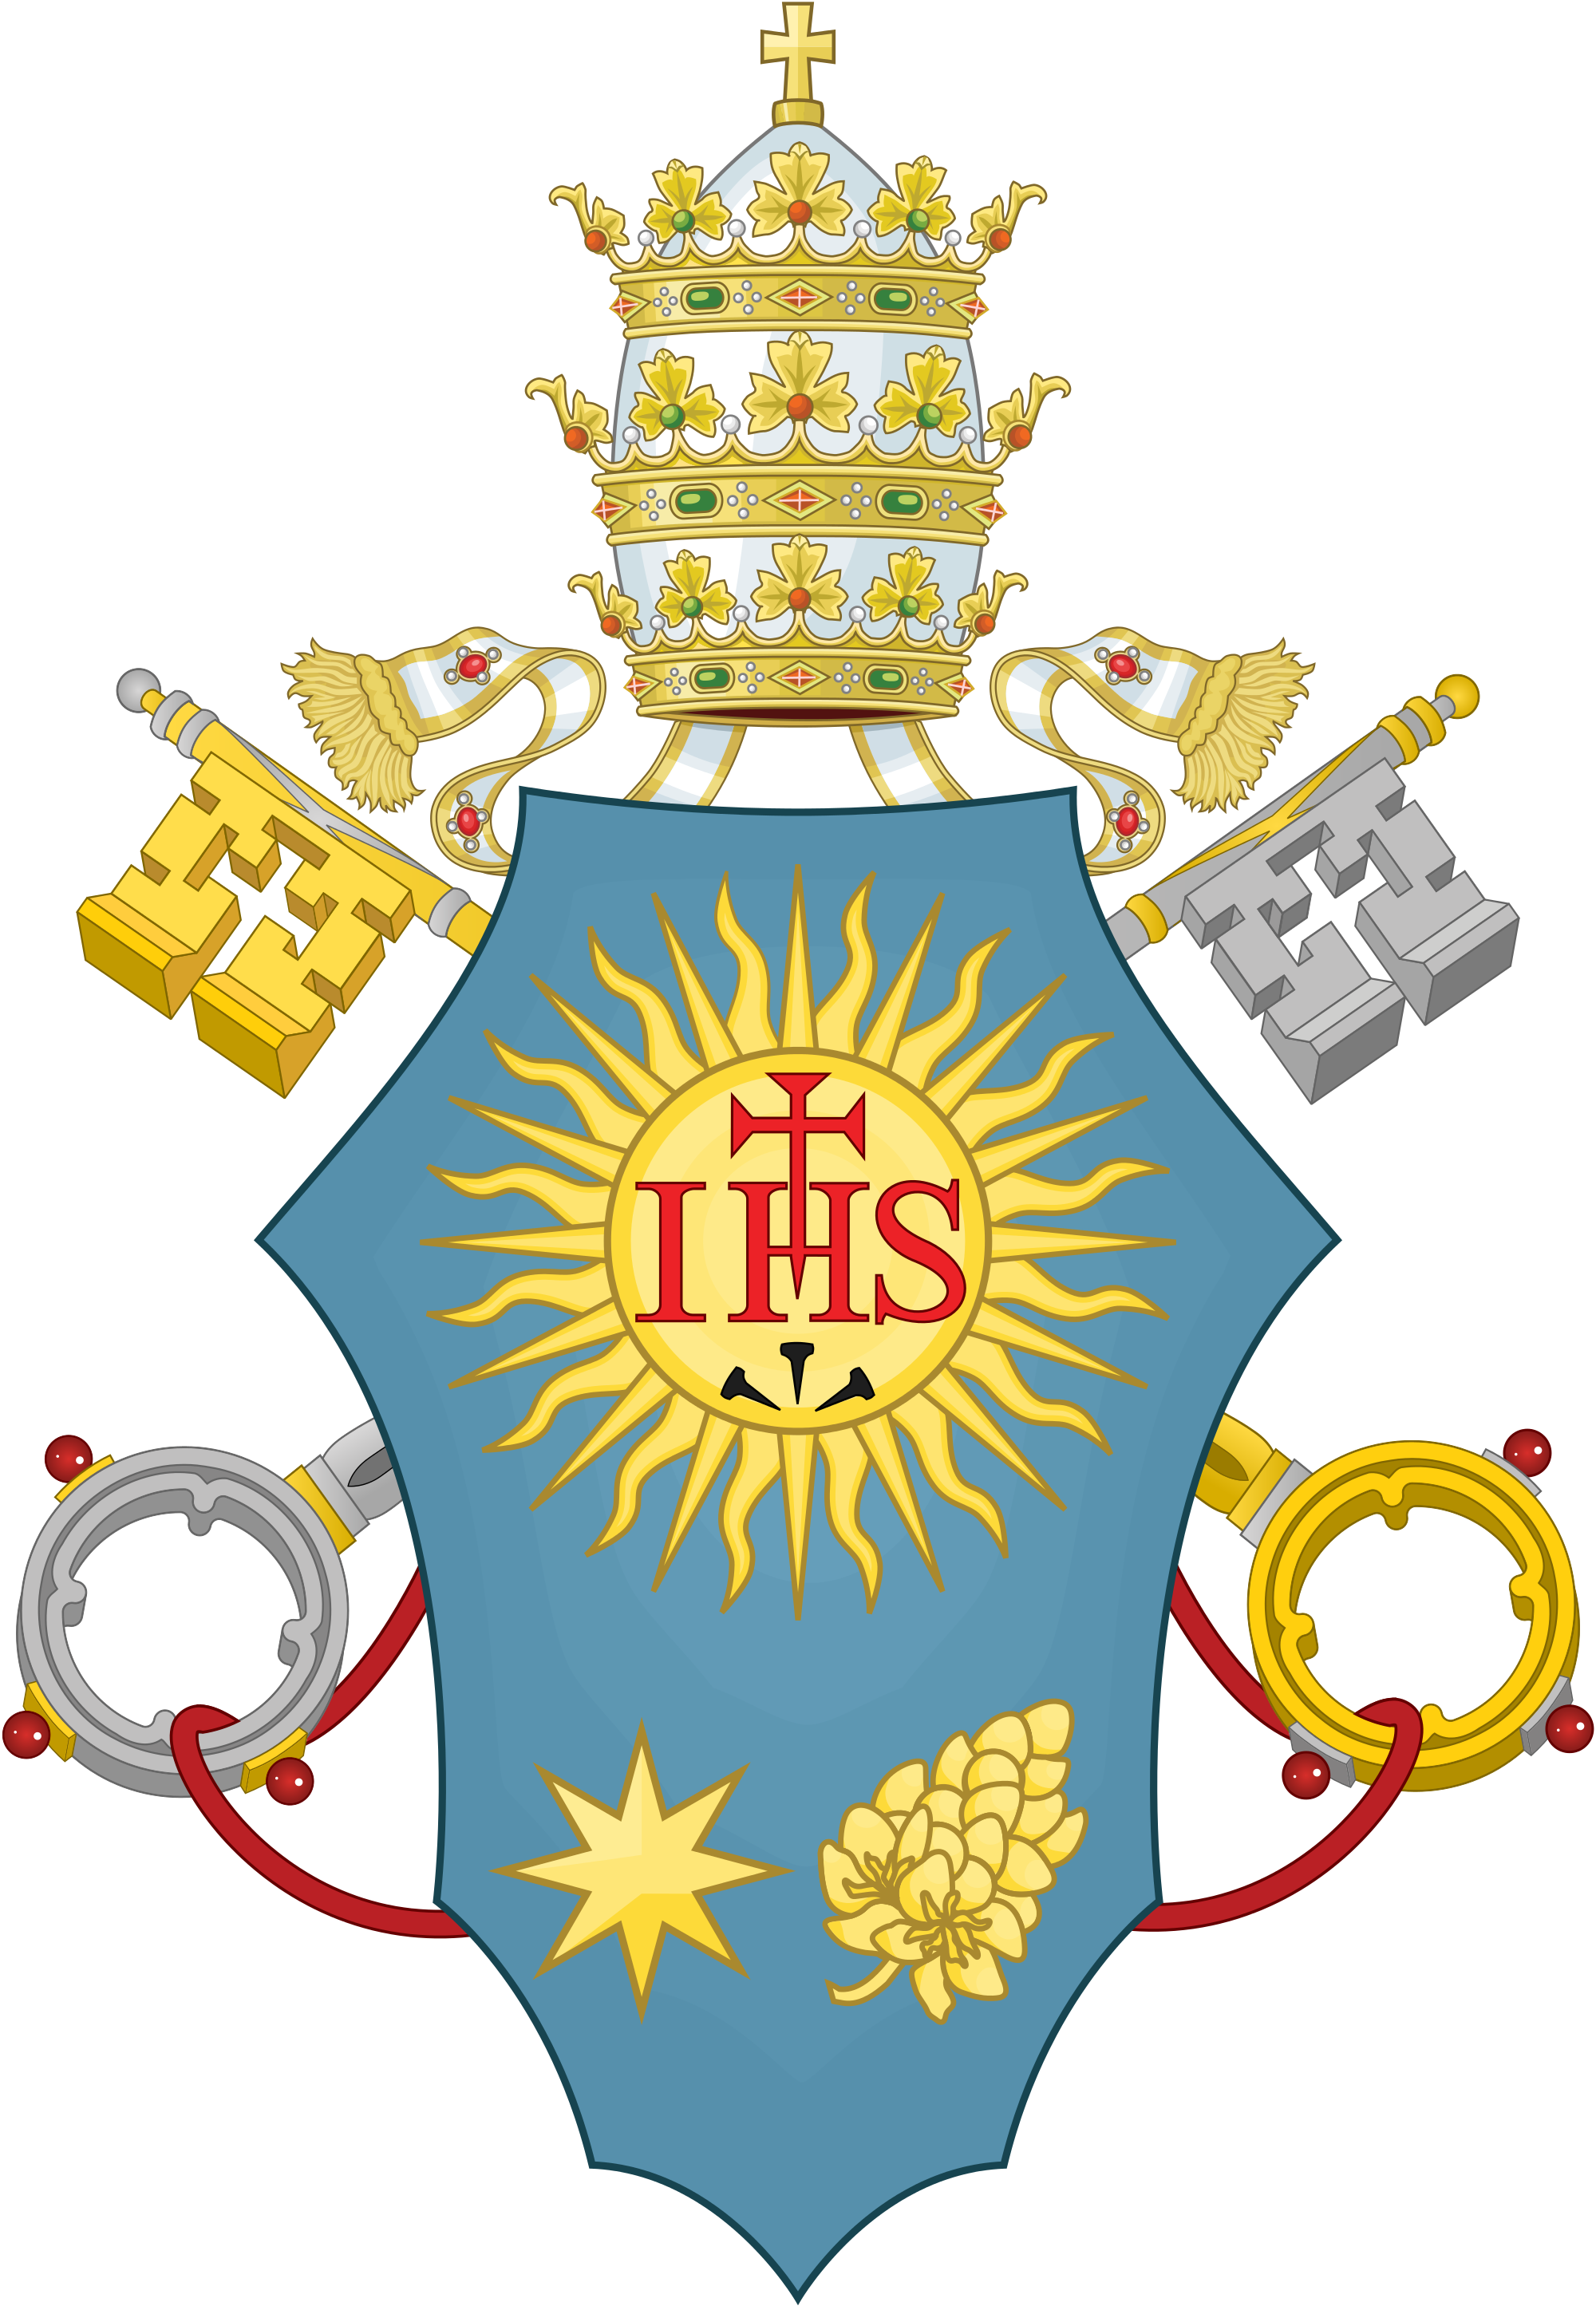 A Coat Of Arms With A Crown And Keys